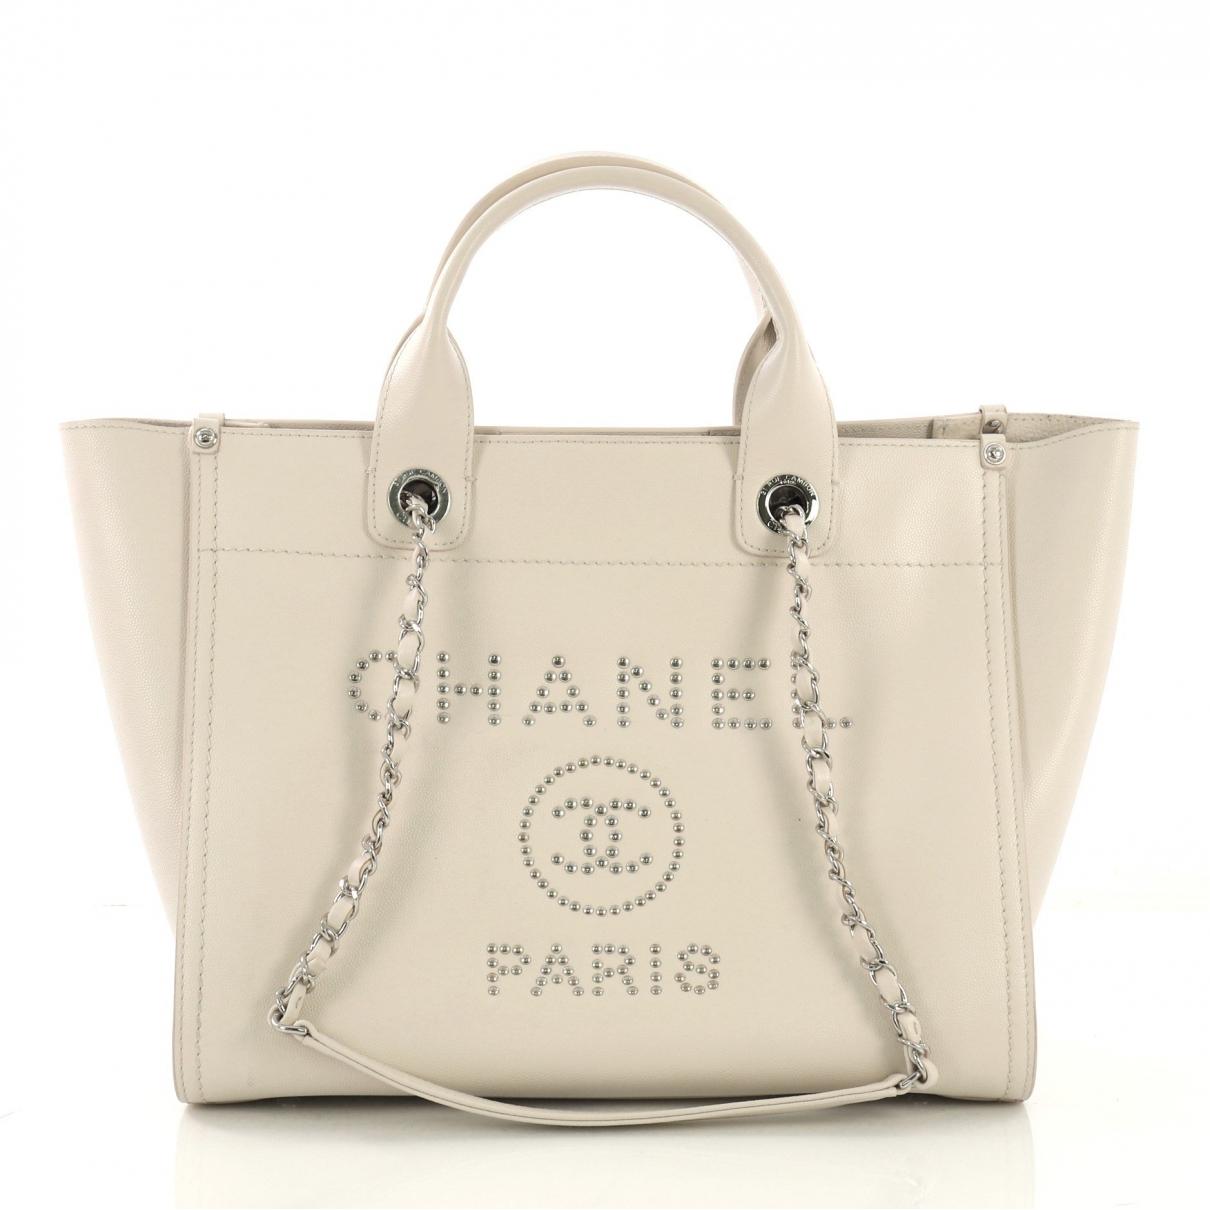 Chanel Deauville White Leather Handbag in White - Lyst